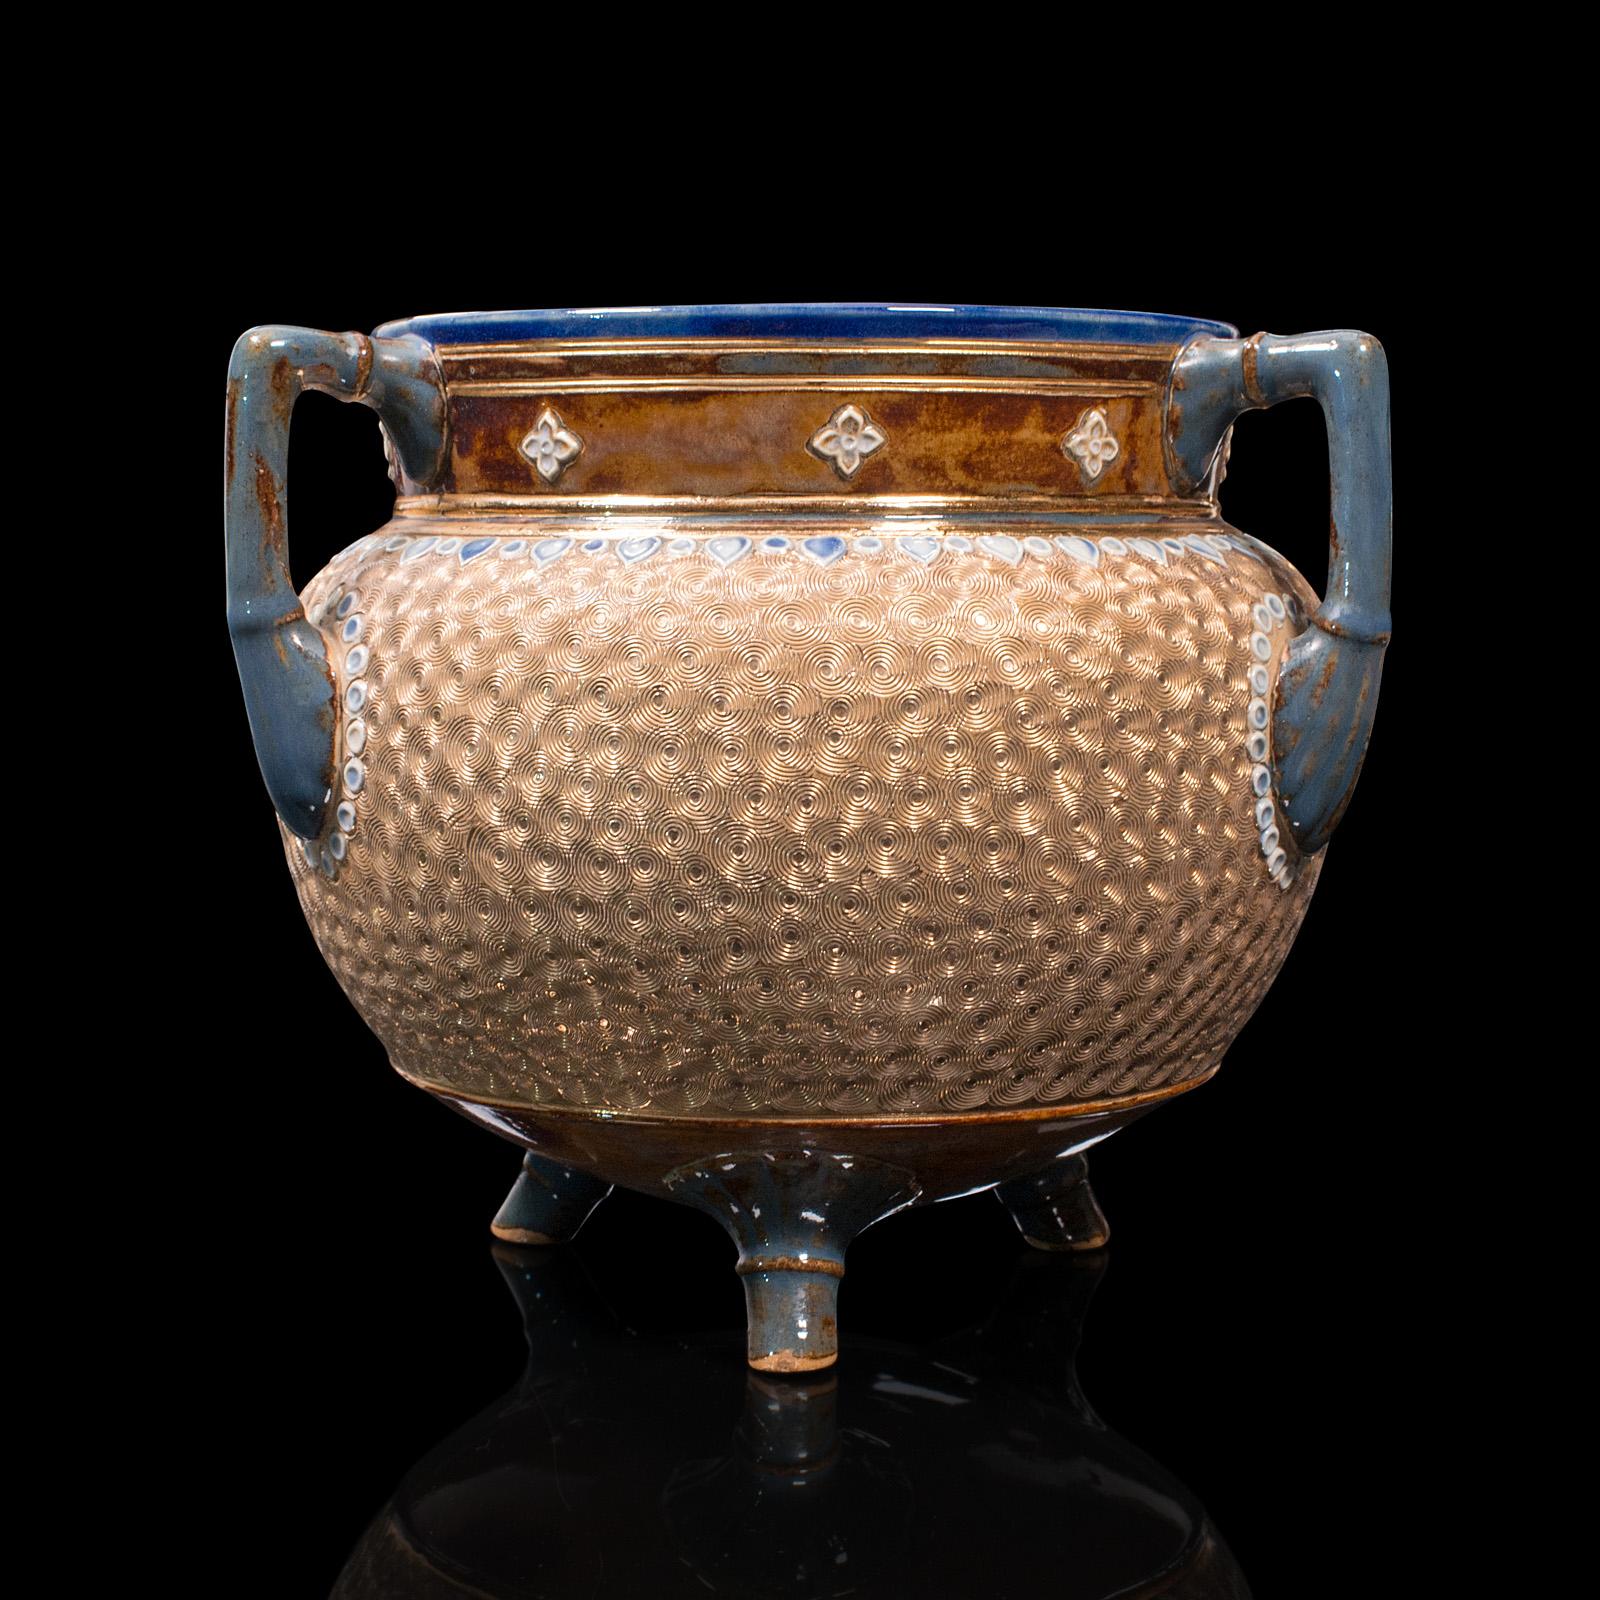 This is an antique decorative jardiniere pot. An English, ceramic cauldron form planter, dating to the Edwardian period, circa 1910.

Dashing gilt pattern and unusual forms catch the eye
Displays a desirable aged patina, in good order